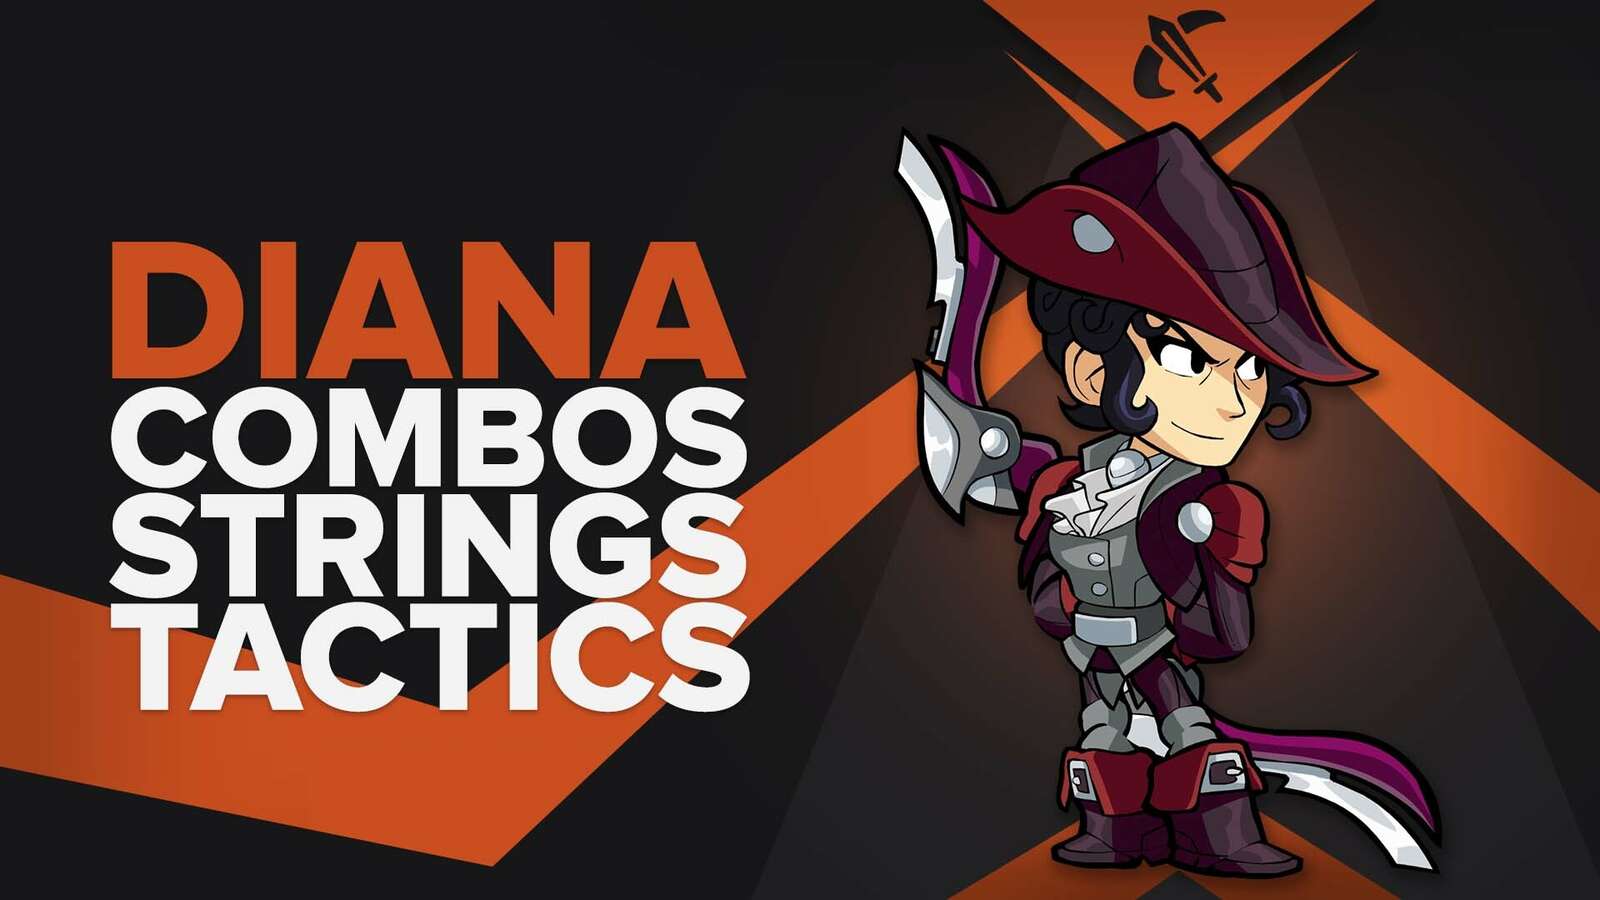 Best Diana combos, strings, and combat tactics in Brawlhalla